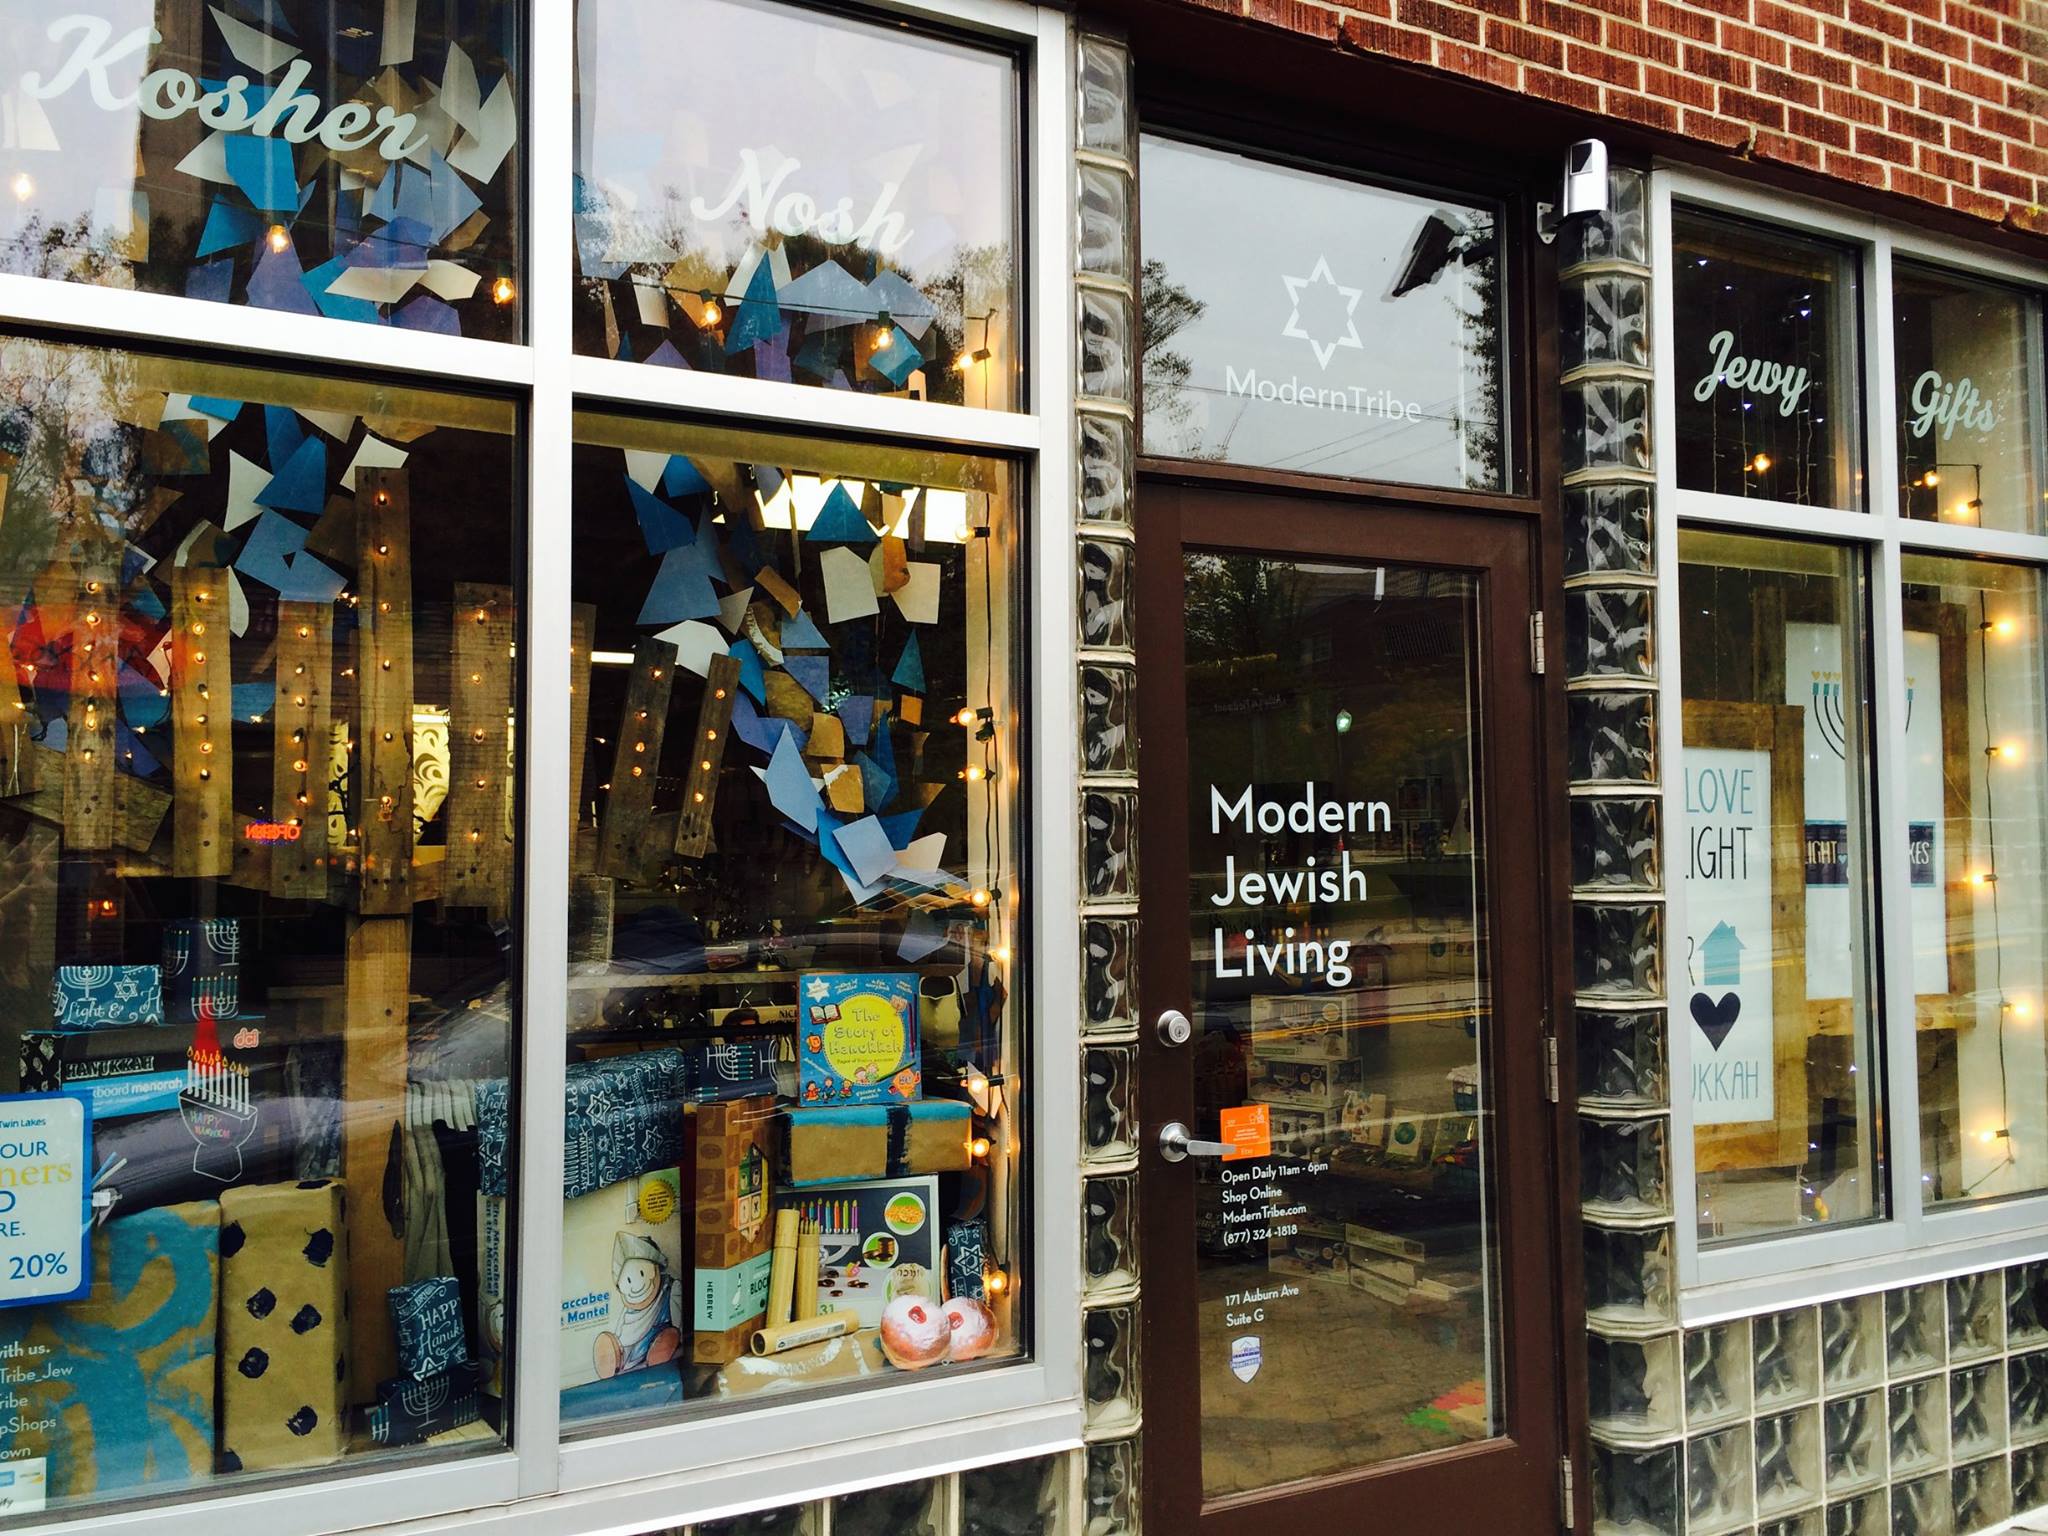 ModernTribe's brick & mortar storefront in Atlanta, GA is decked-out for Hanukkah.